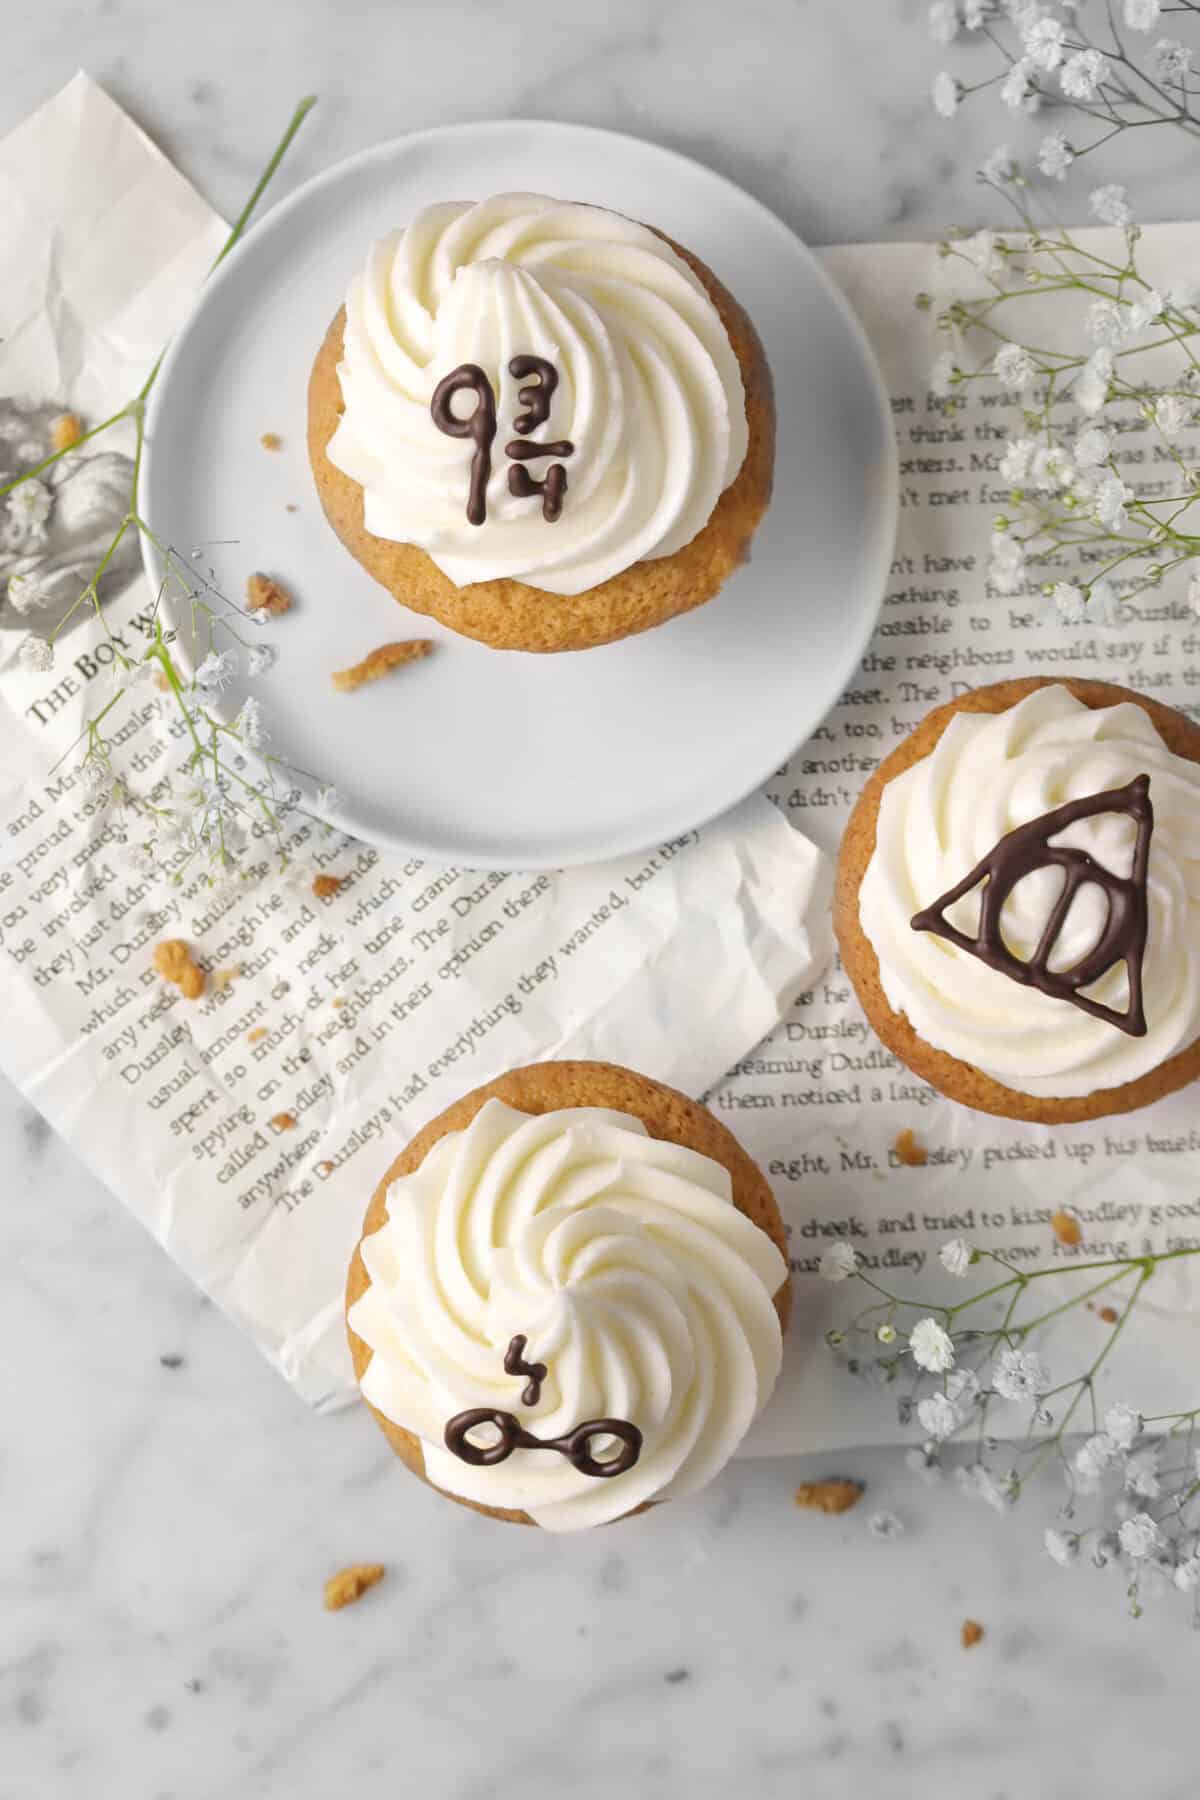 overheat shot of three cupcakes on harry potter book pages with flowers